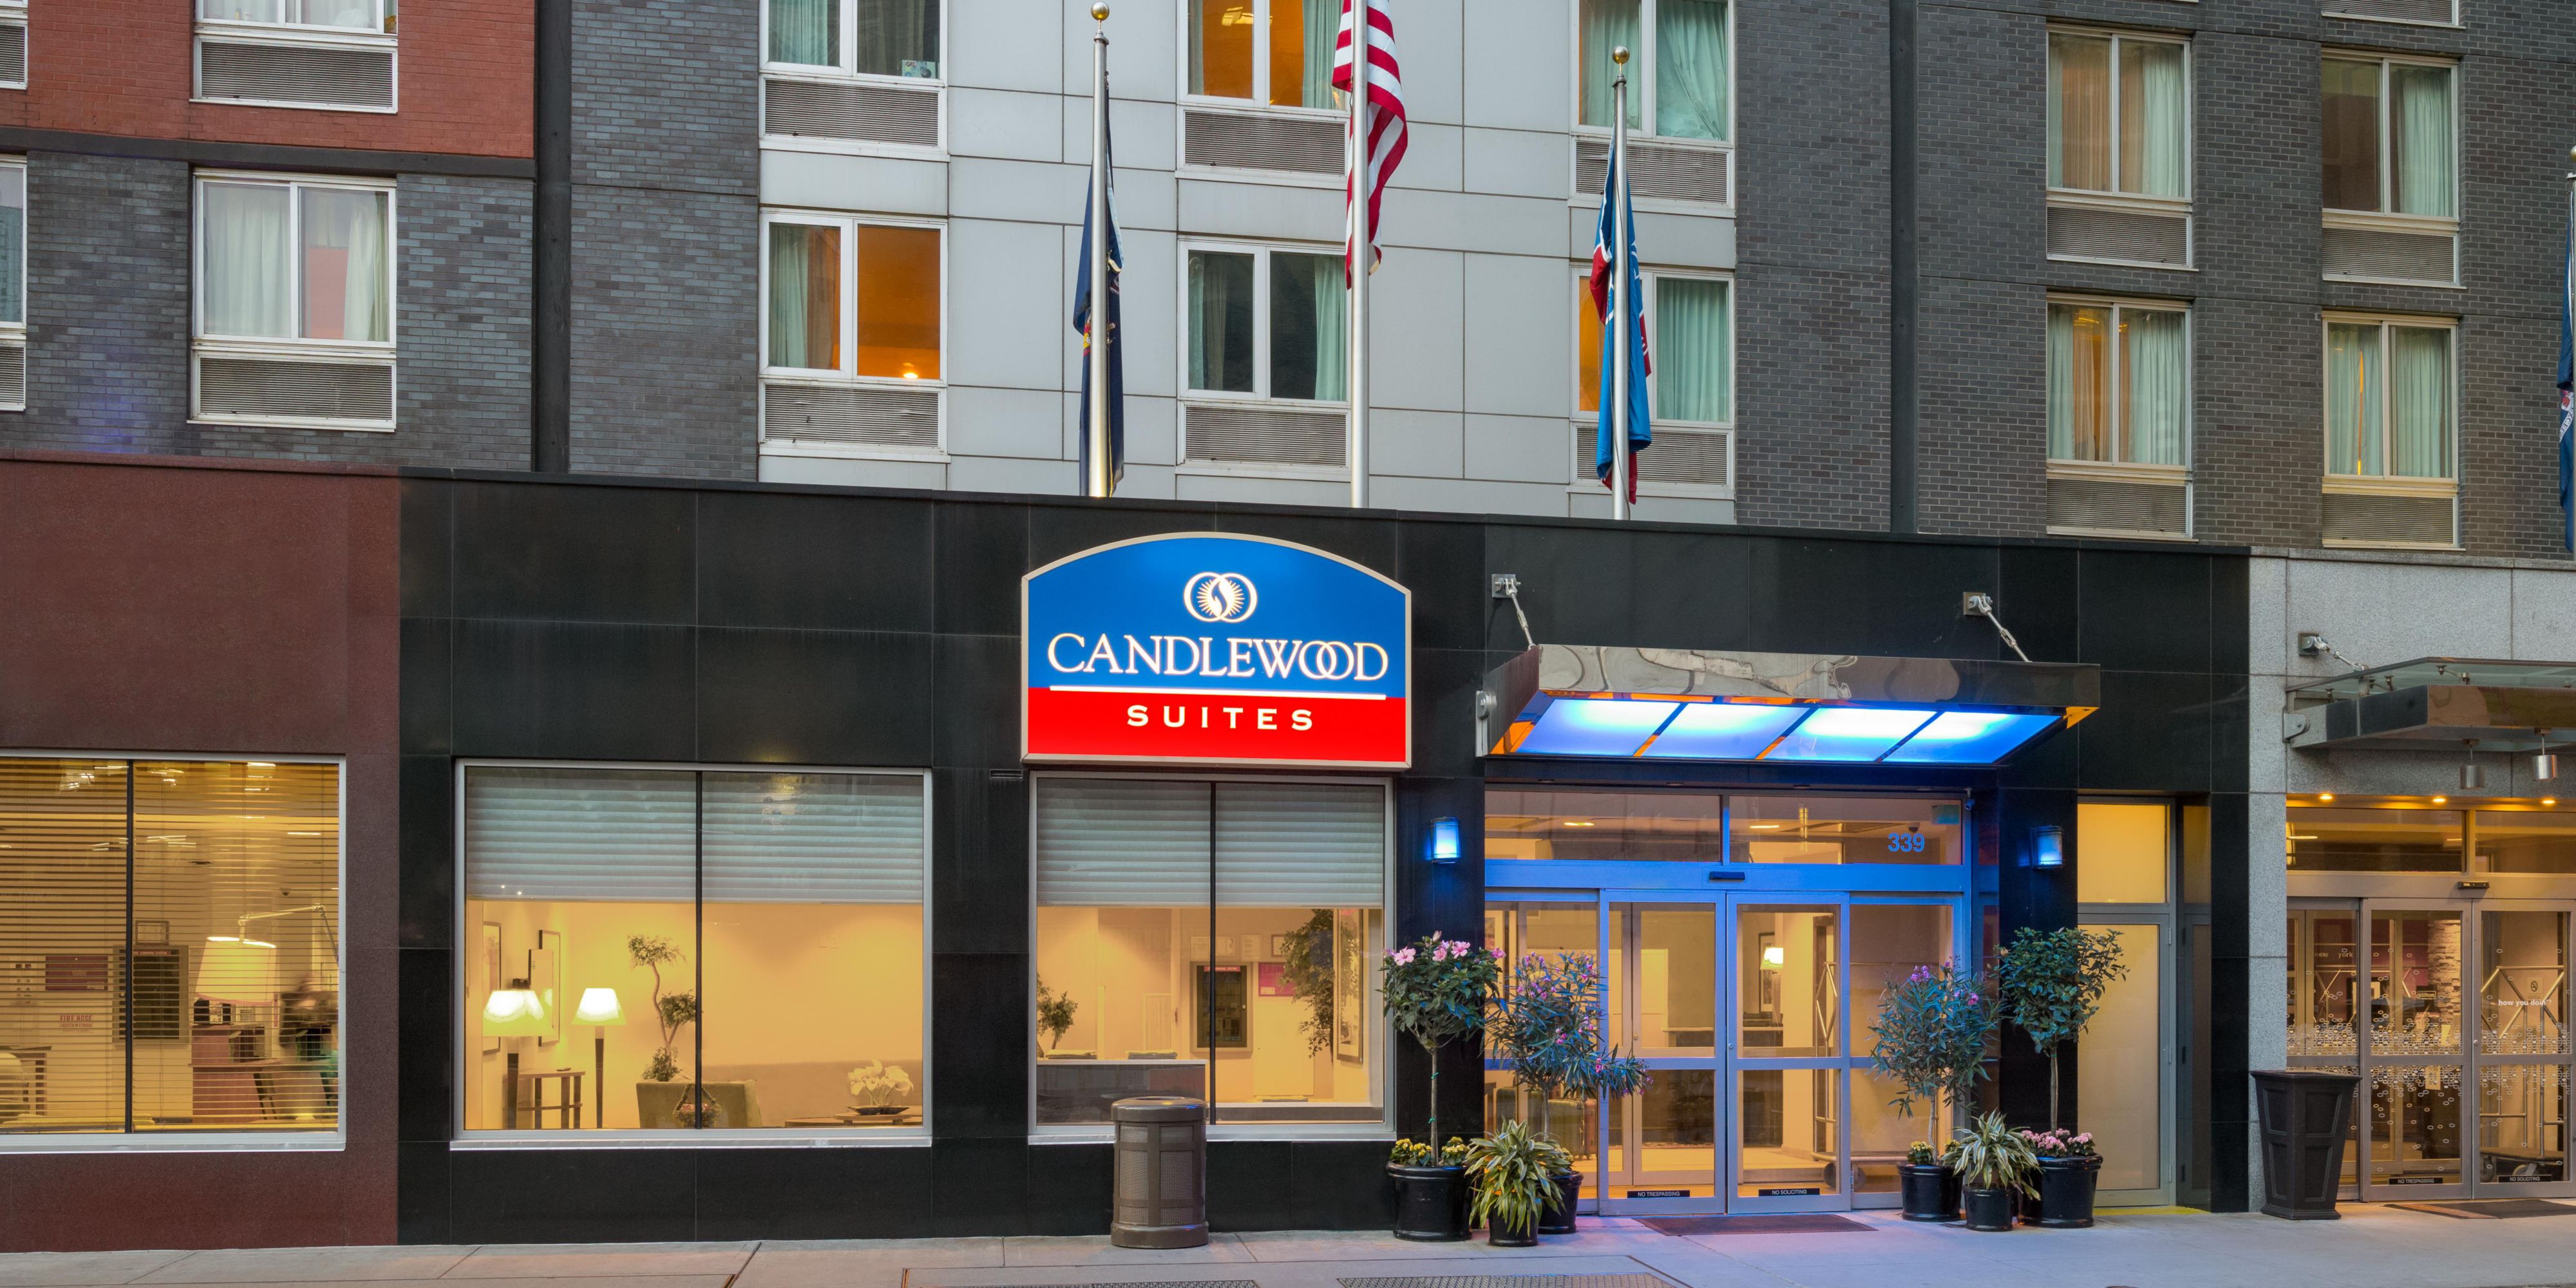 Candlewood Suites New York 5037911903 2x1